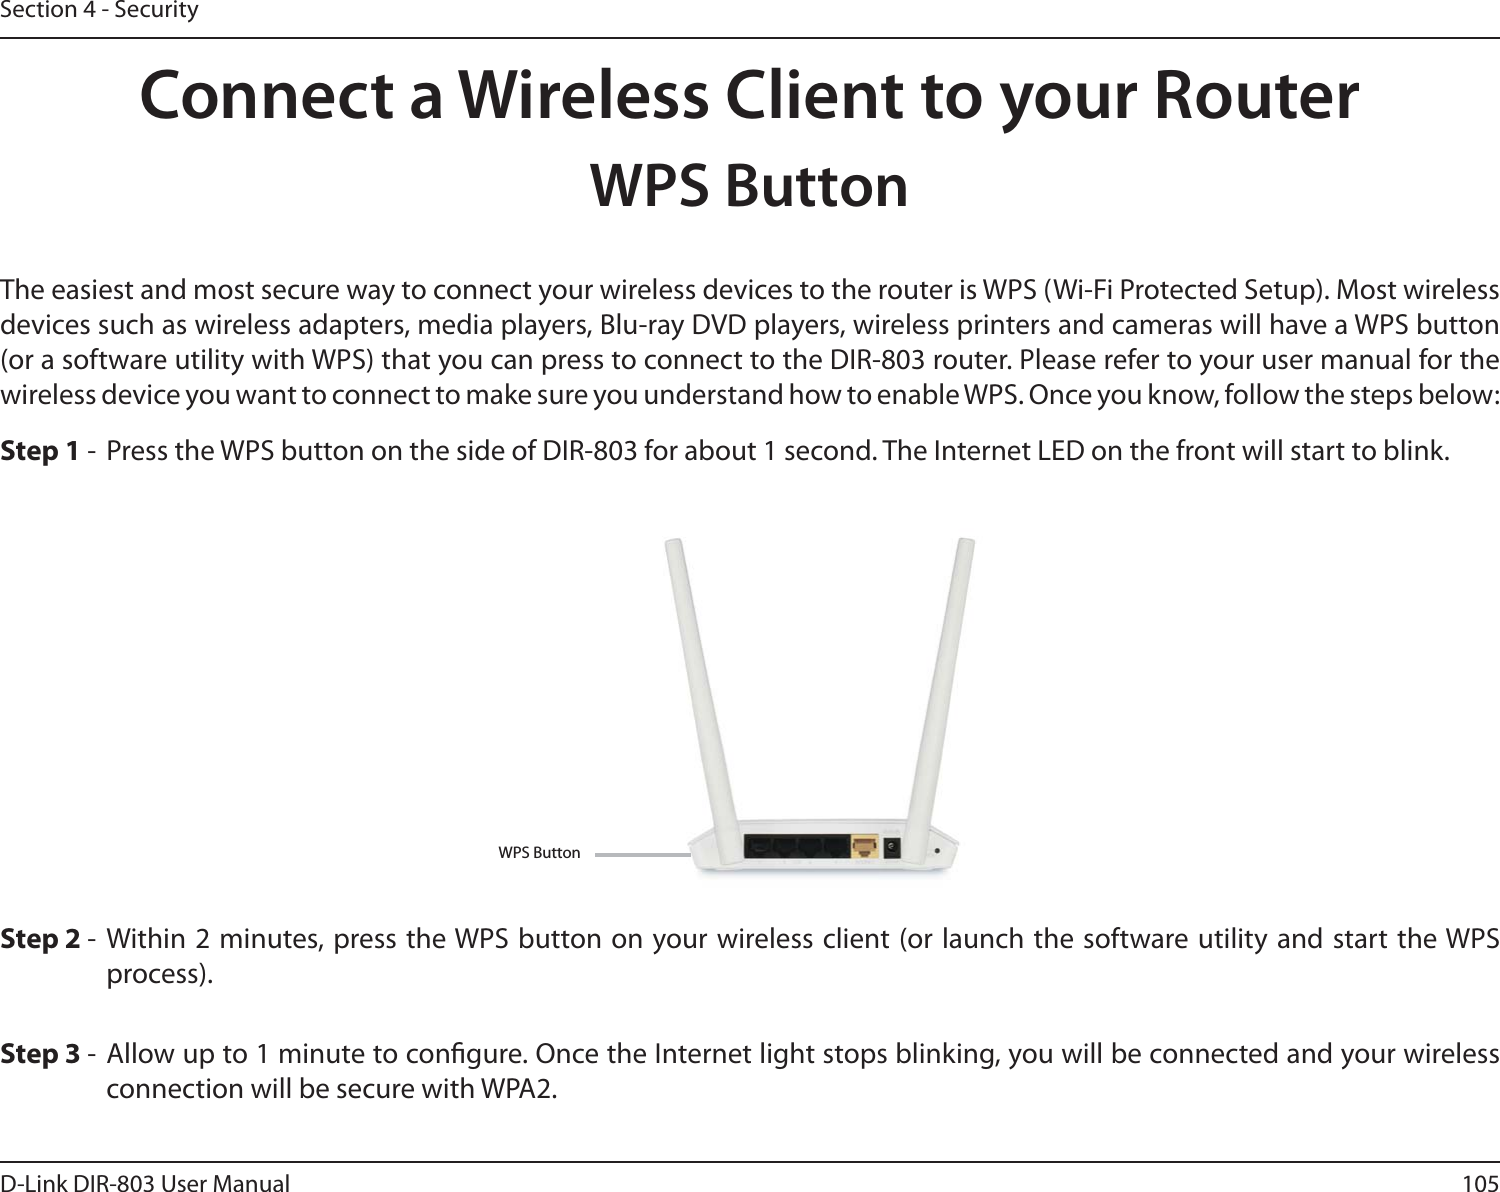 105D-Link DIR-803 User ManualSection 4 - SecurityConnect a Wireless Client to your RouterWPS ButtonStep 2 - Within 2 minutes, press the WPS button on your wireless client (or launch the software utility and start the WPS process).The easiest and most secure way to connect your wireless devices to the router is WPS (Wi-Fi Protected Setup). Most wireless devices such as wireless adapters, media players, Blu-ray DVD players, wireless printers and cameras will have a WPS button (or a software utility with WPS) that you can press to connect to the DIR-803 router. Please refer to your user manual for the wireless device you want to connect to make sure you understand how to enable WPS. Once you know, follow the steps below:Step 1 -  Press the WPS button on the side of DIR-803 for about 1 second. The Internet LED on the front will start to blink.Step 3 - Allow up to 1 minute to congure. Once the Internet light stops blinking, you will be connected and your wireless connection will be secure with WPA2.WPS Button